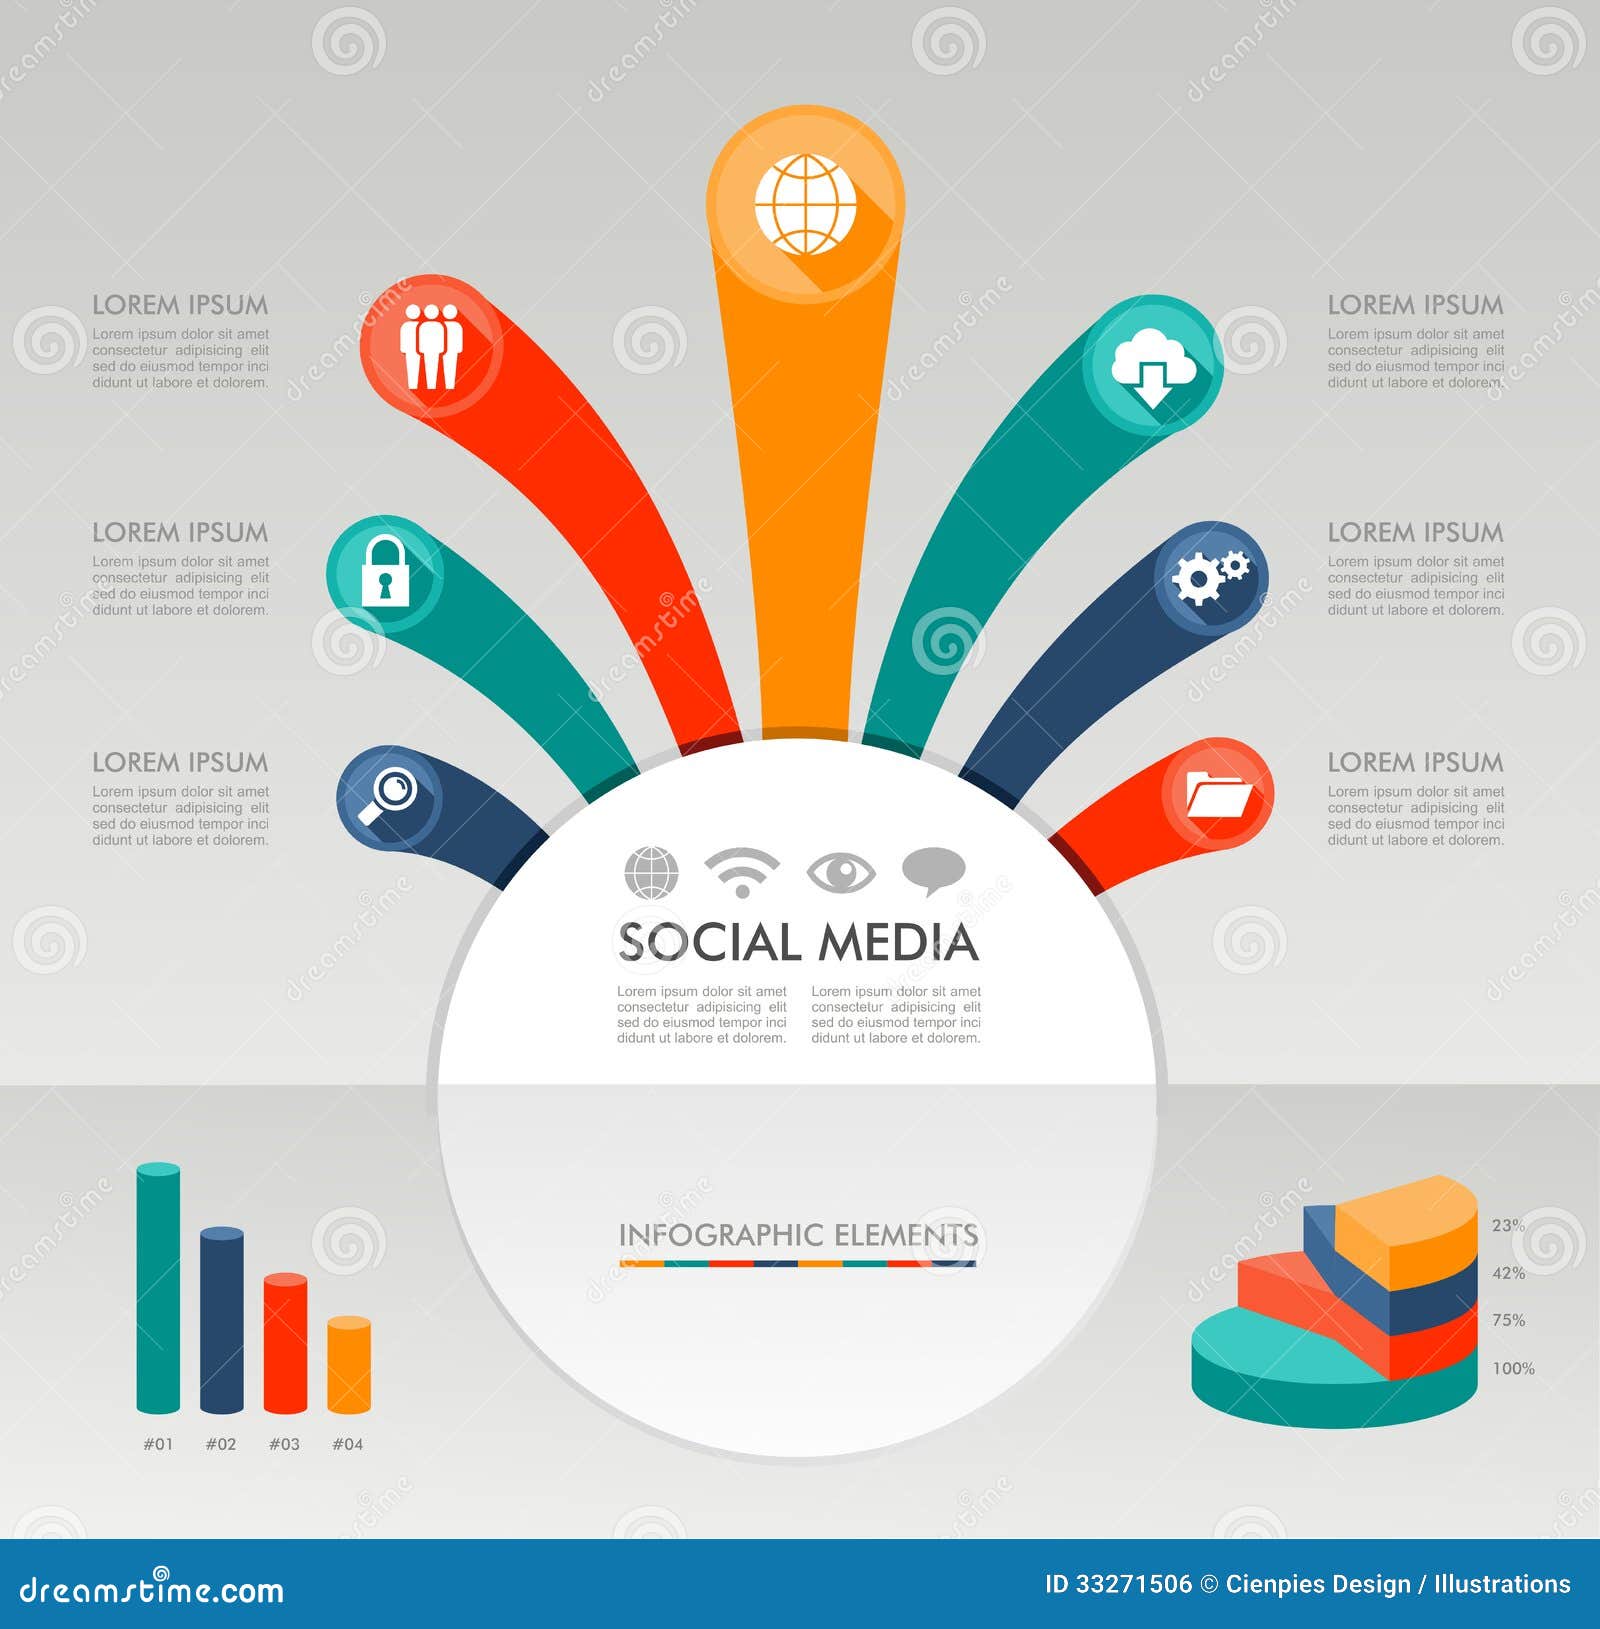 Social Media Infographic Template Graphic Elements Illustration Stock Vector Illustration Of Concept Search 33271506